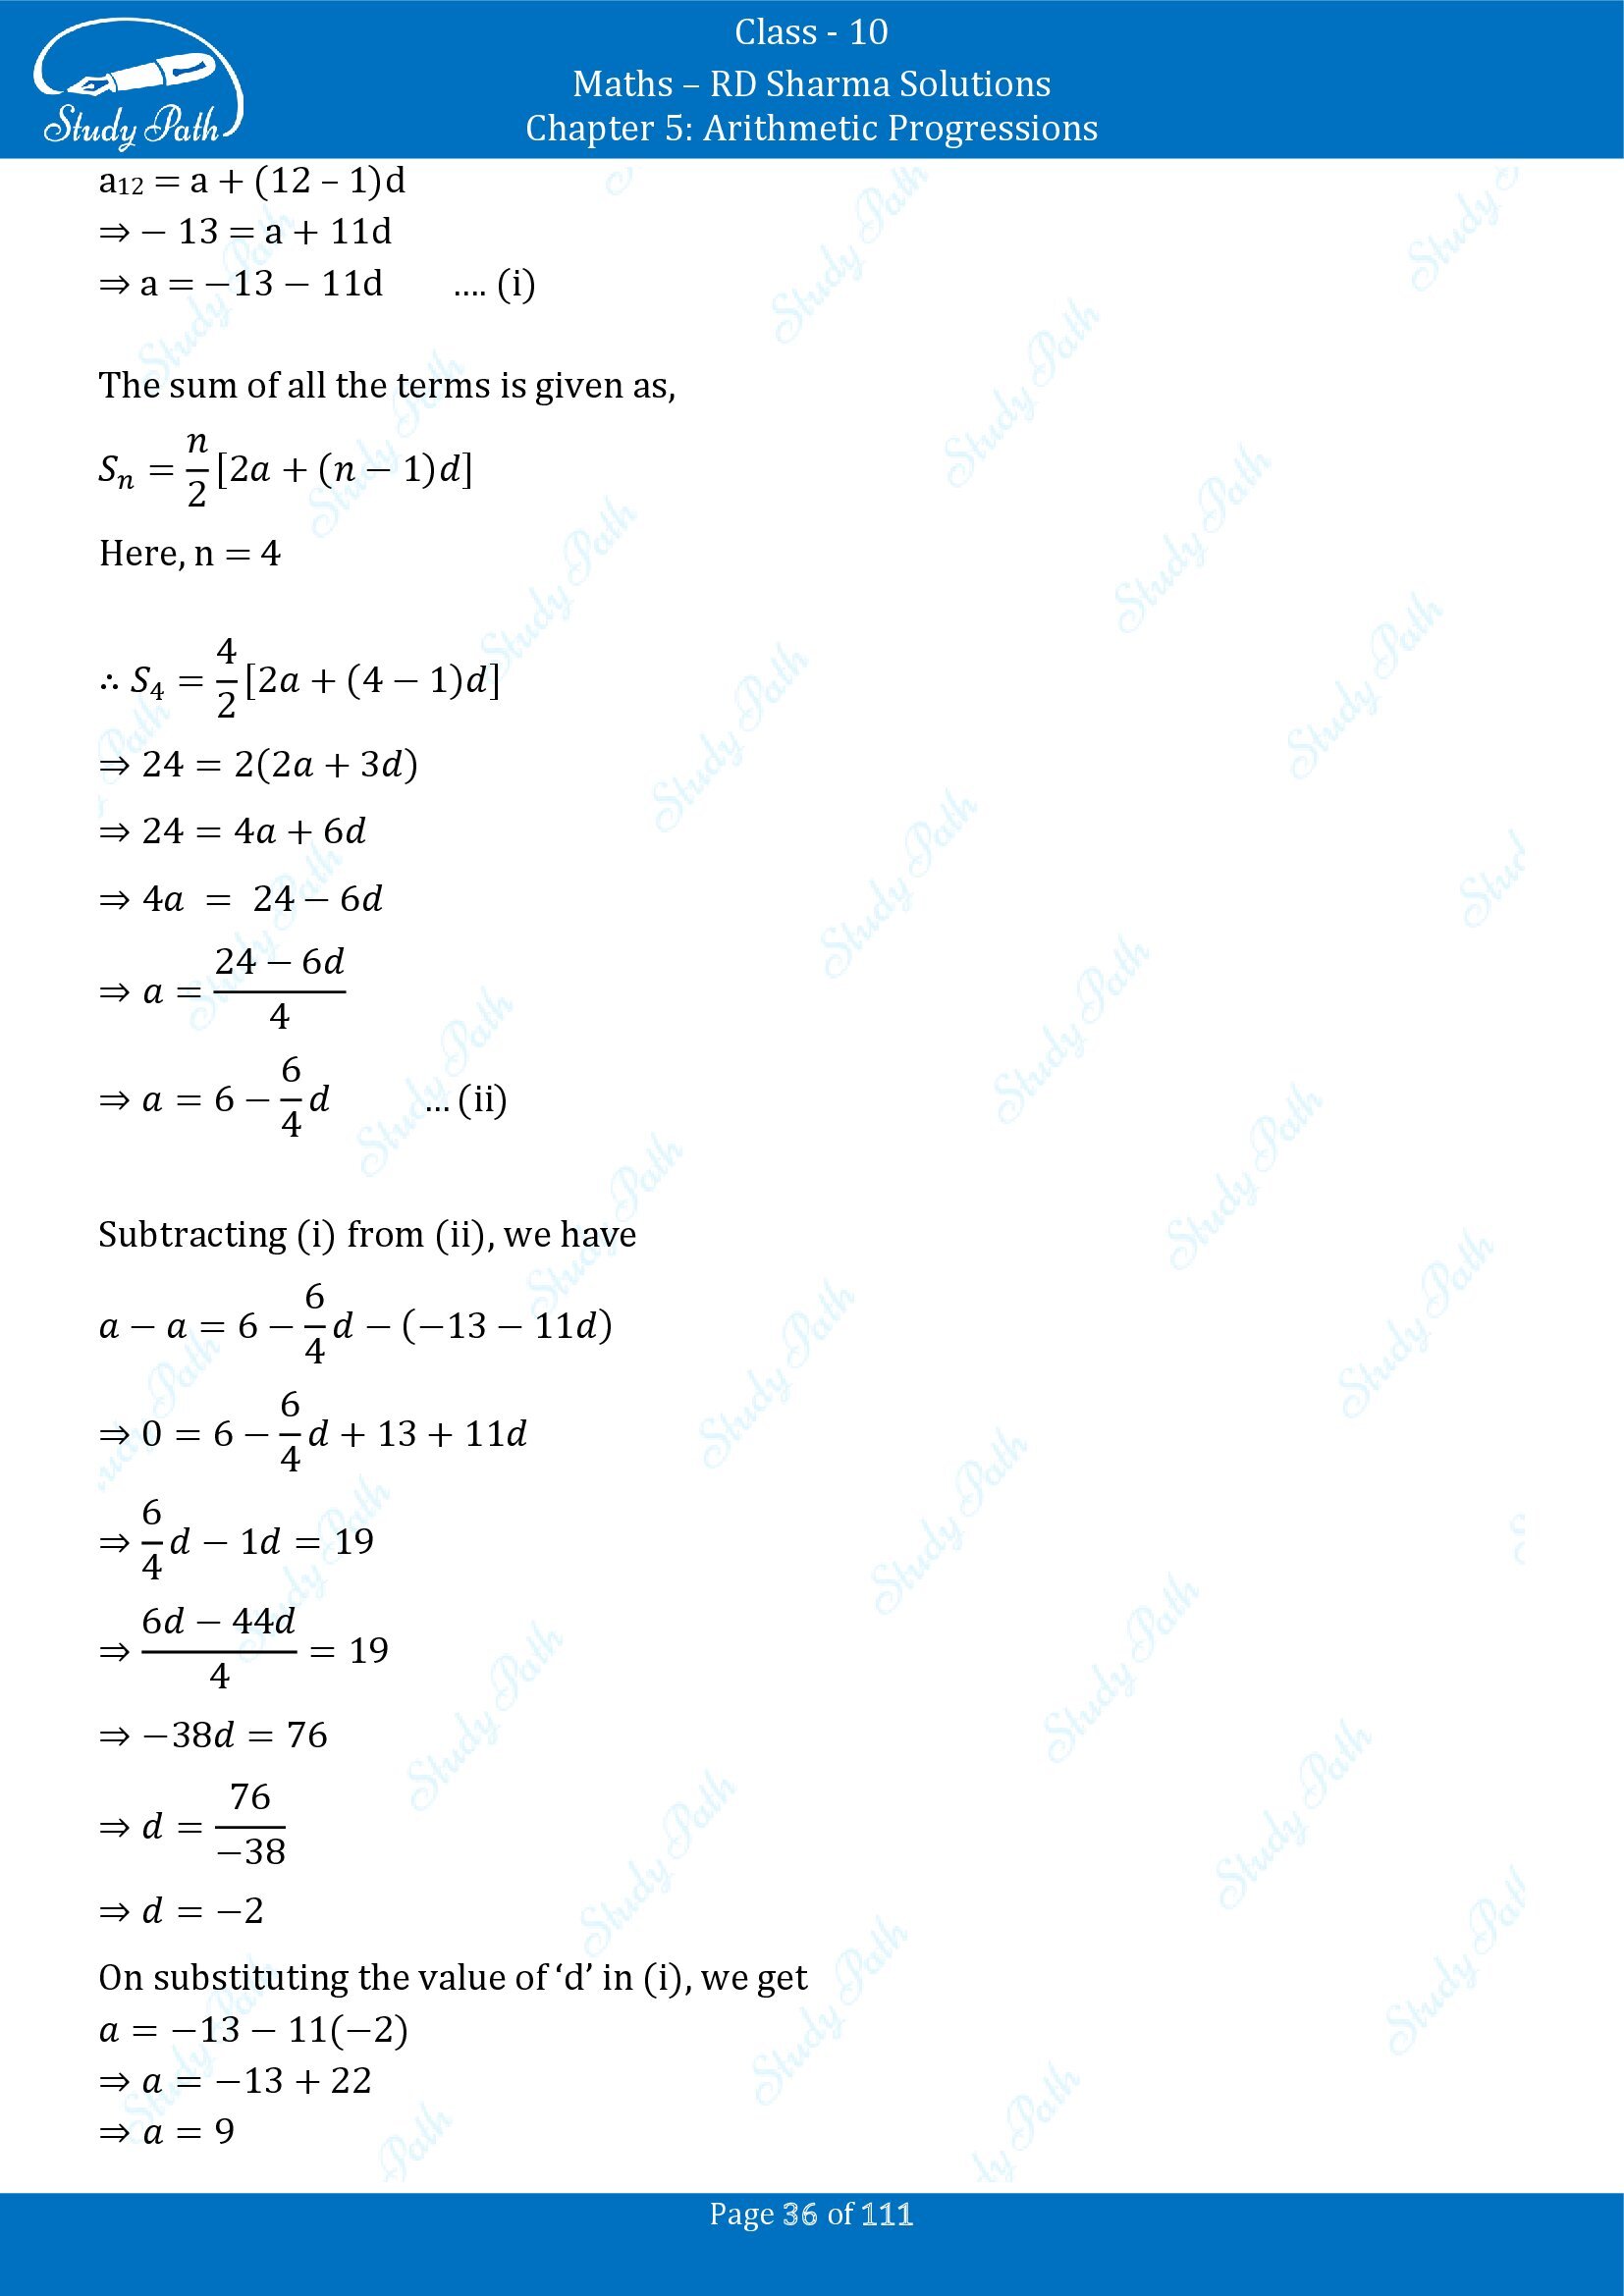 RD Sharma Solutions Class 10 Chapter 5 Arithmetic Progressions Exercise 5.6 00036